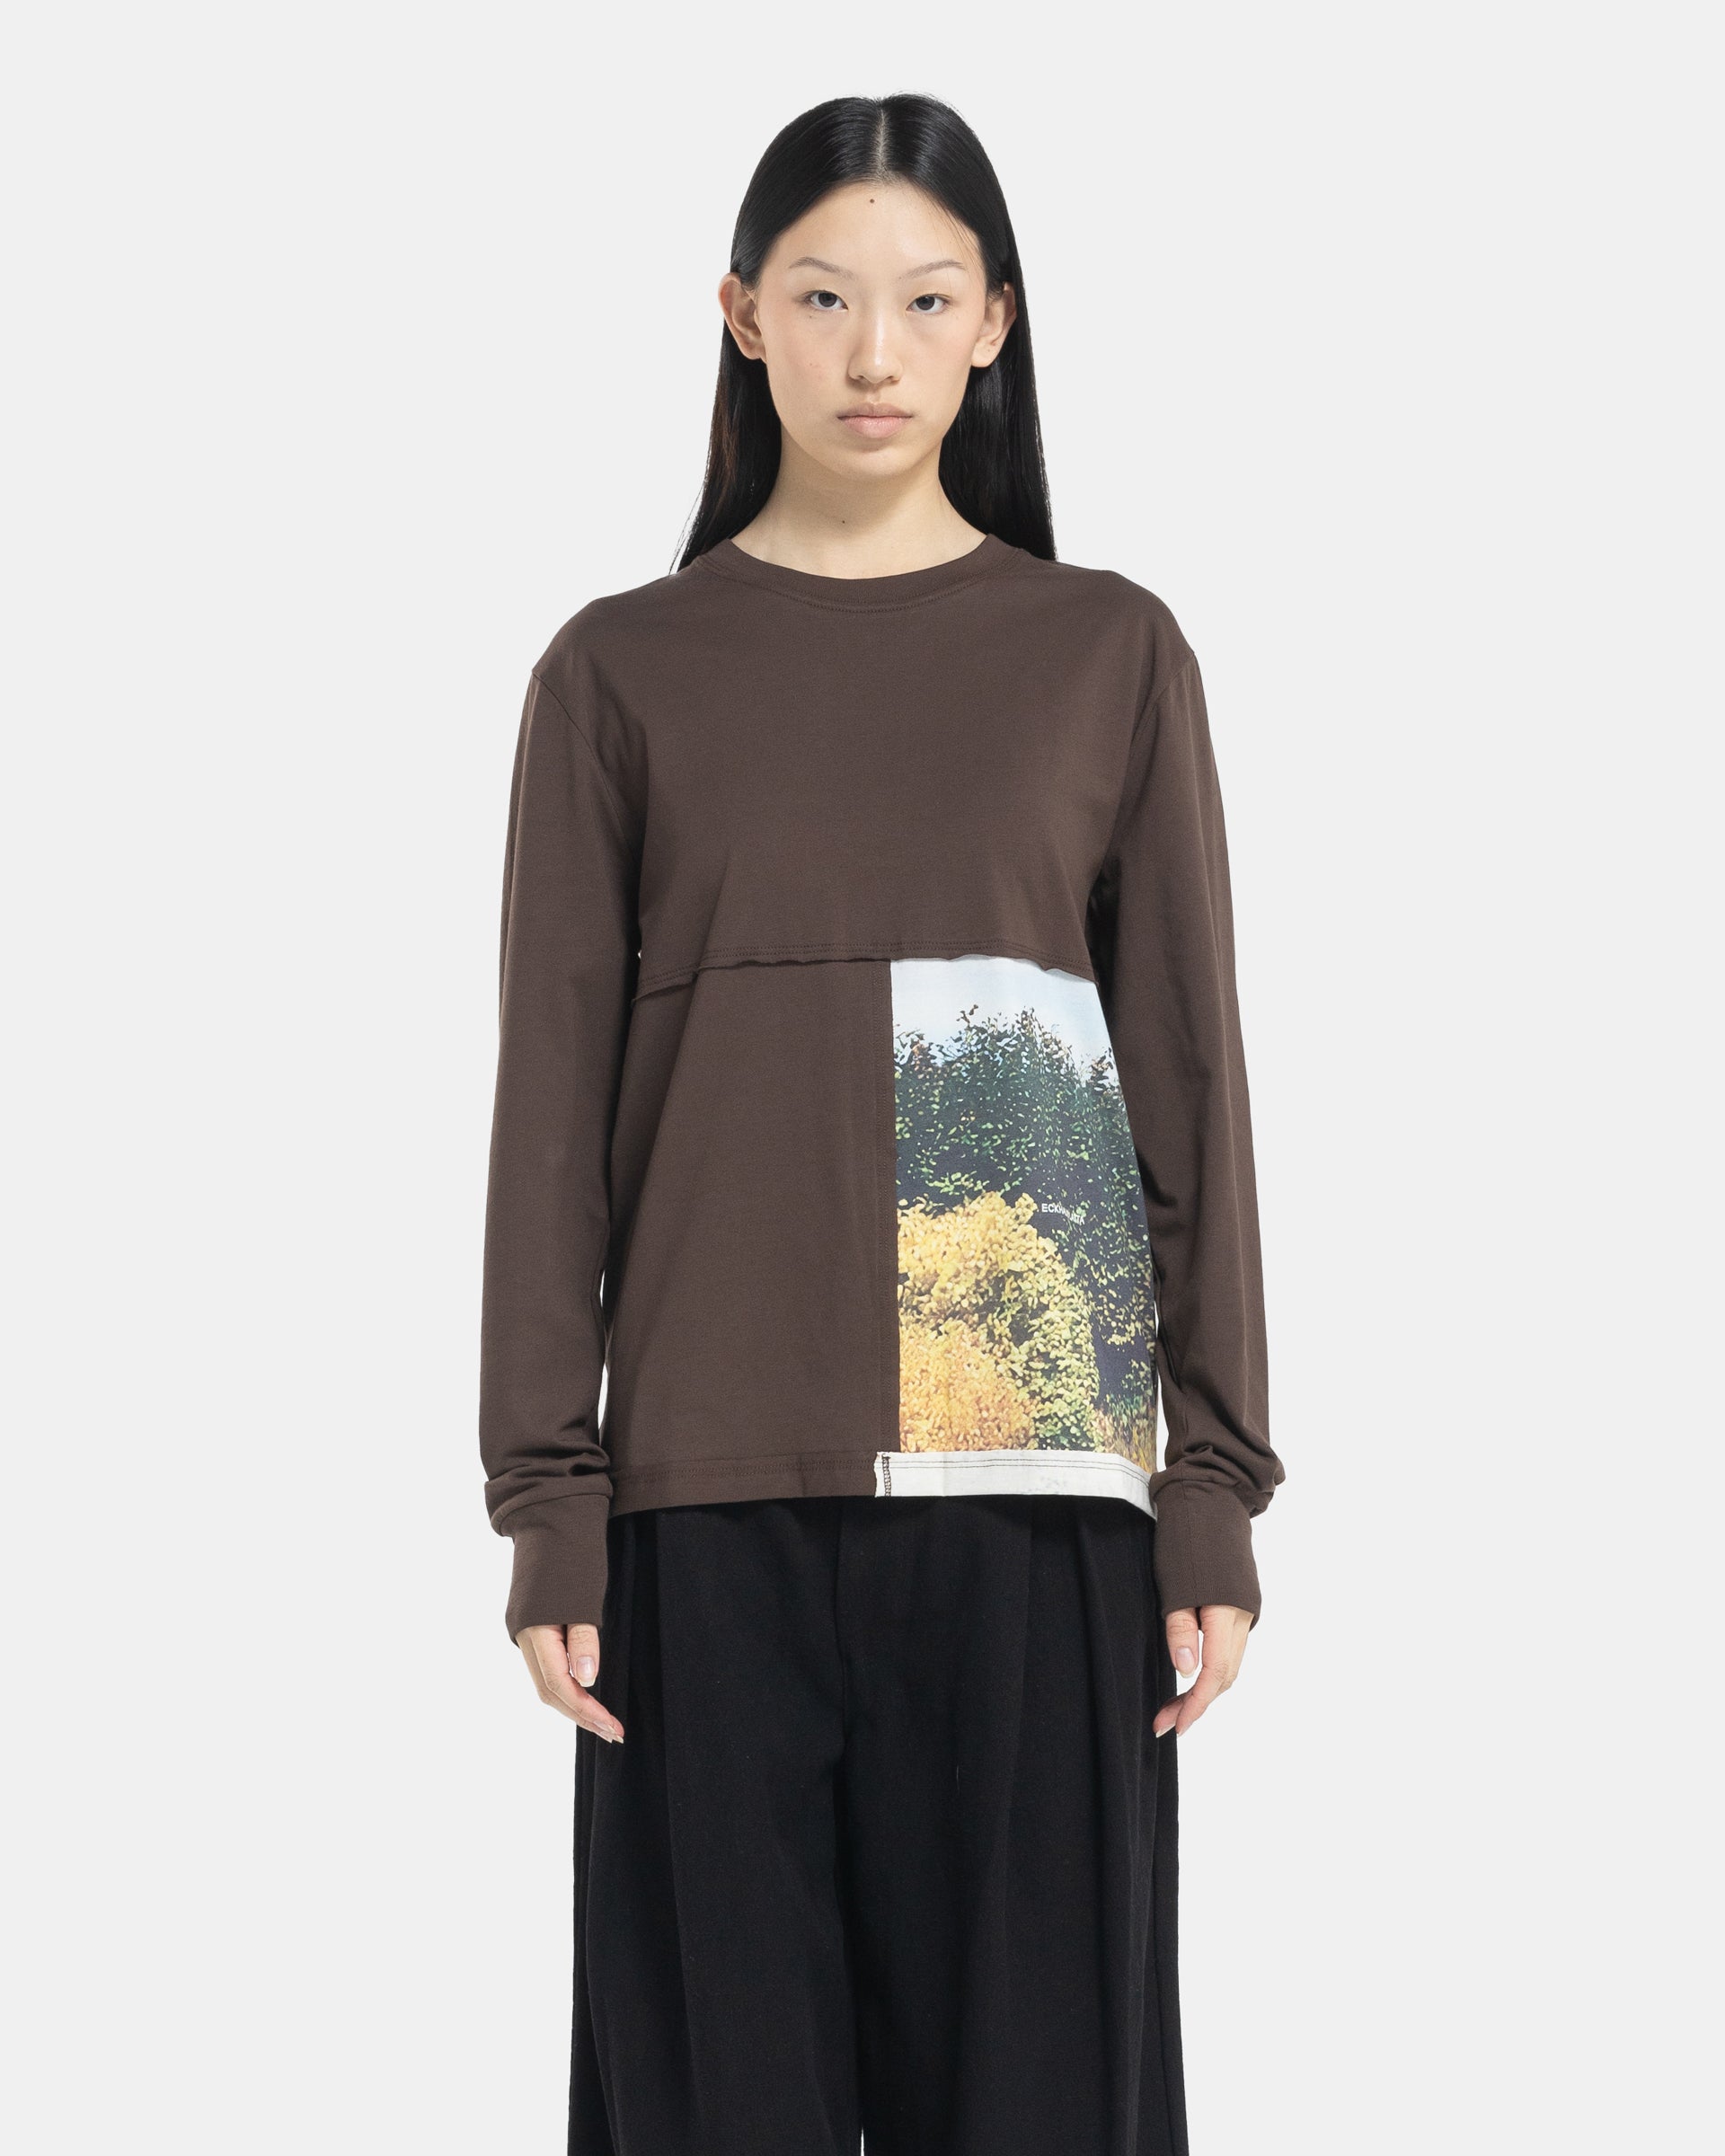 Female model wearing a brown Eckhaus Latta Lapped Longsleeve T-shirt with a printed design.